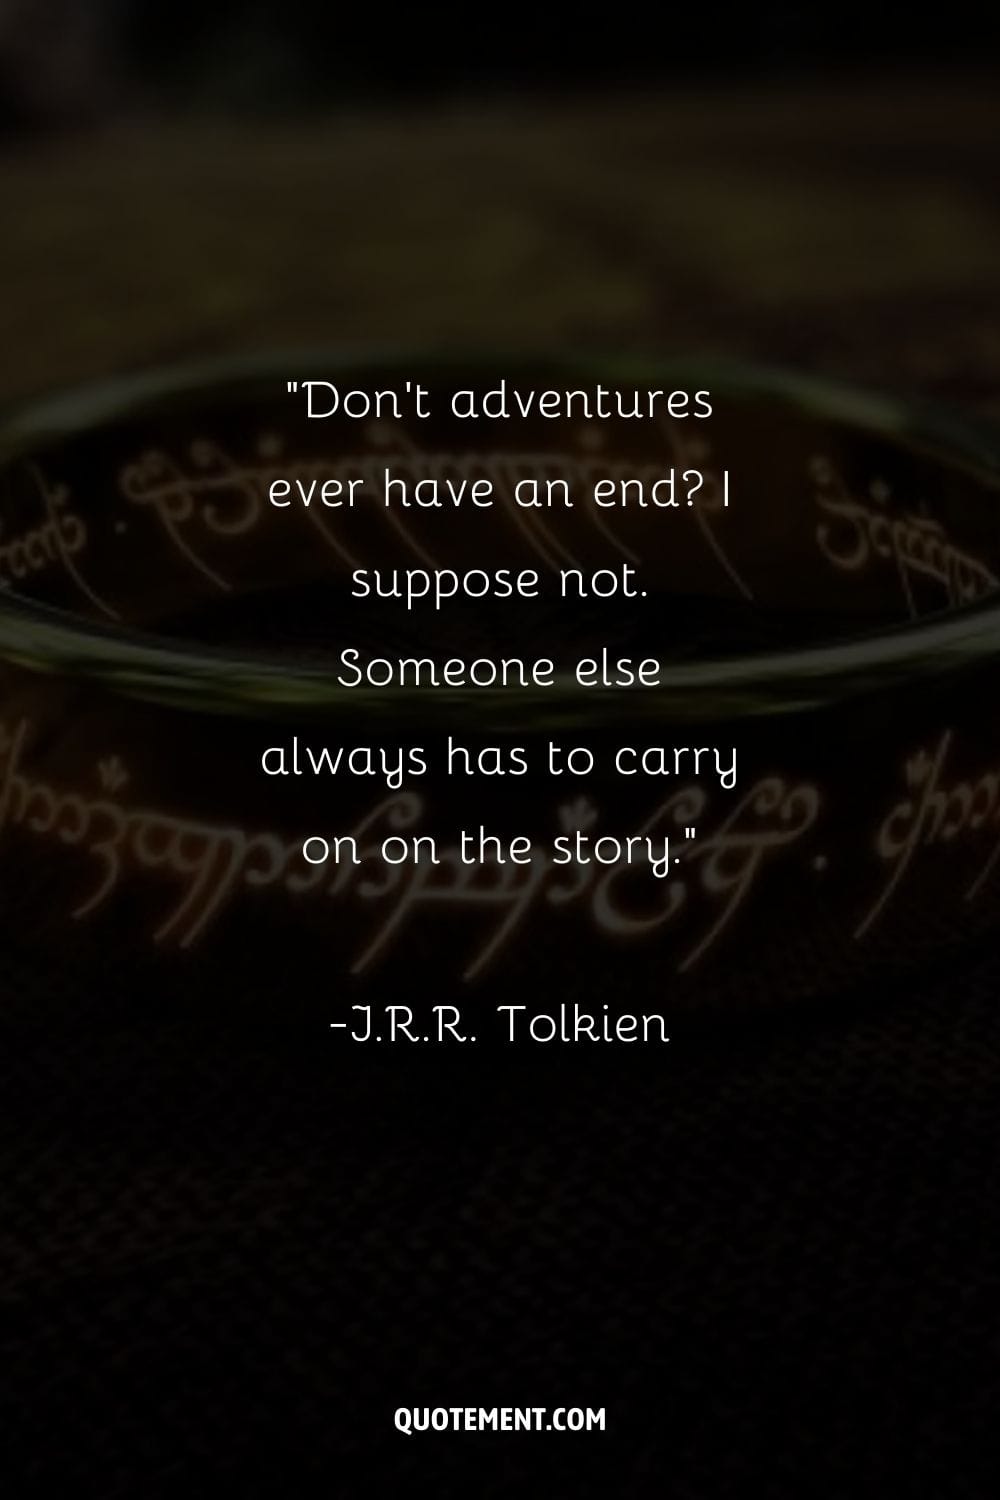 Don't adventures ever have an end I suppose not. Someone else always has to carry on on the story.